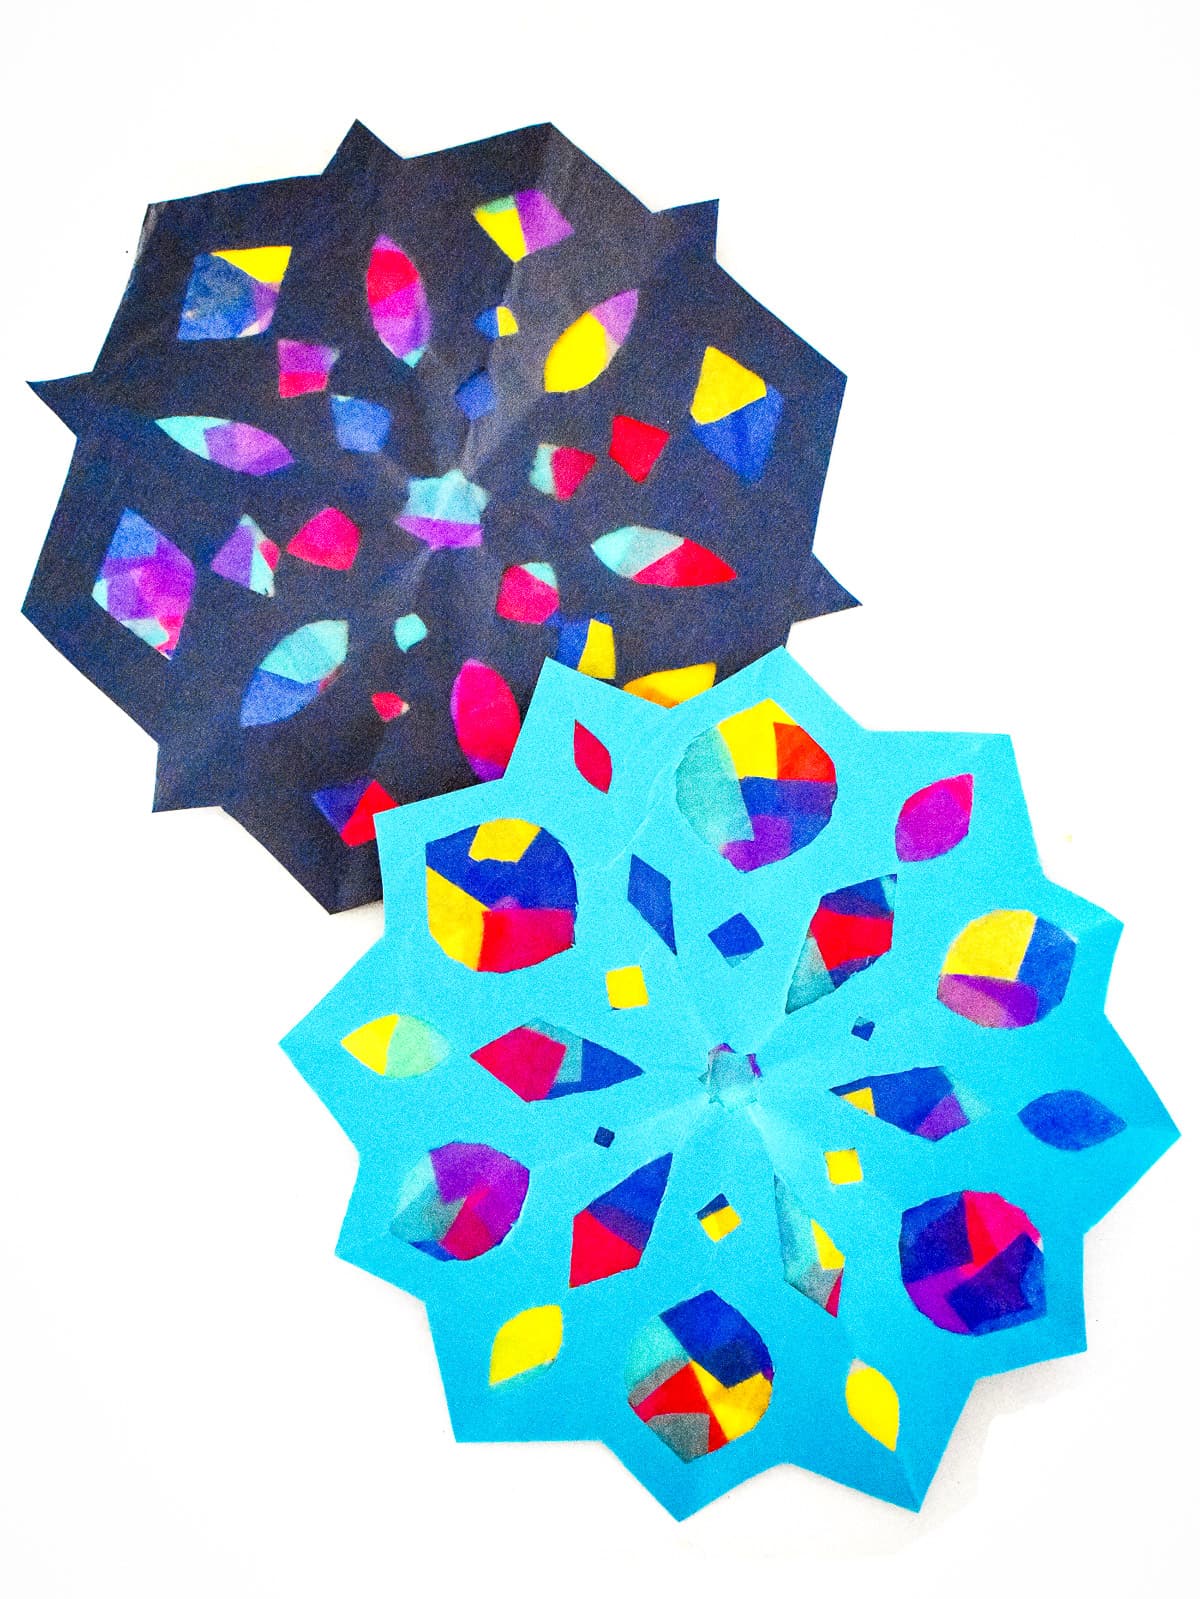 Two Snowflake Suncatchers overlapping on a white background